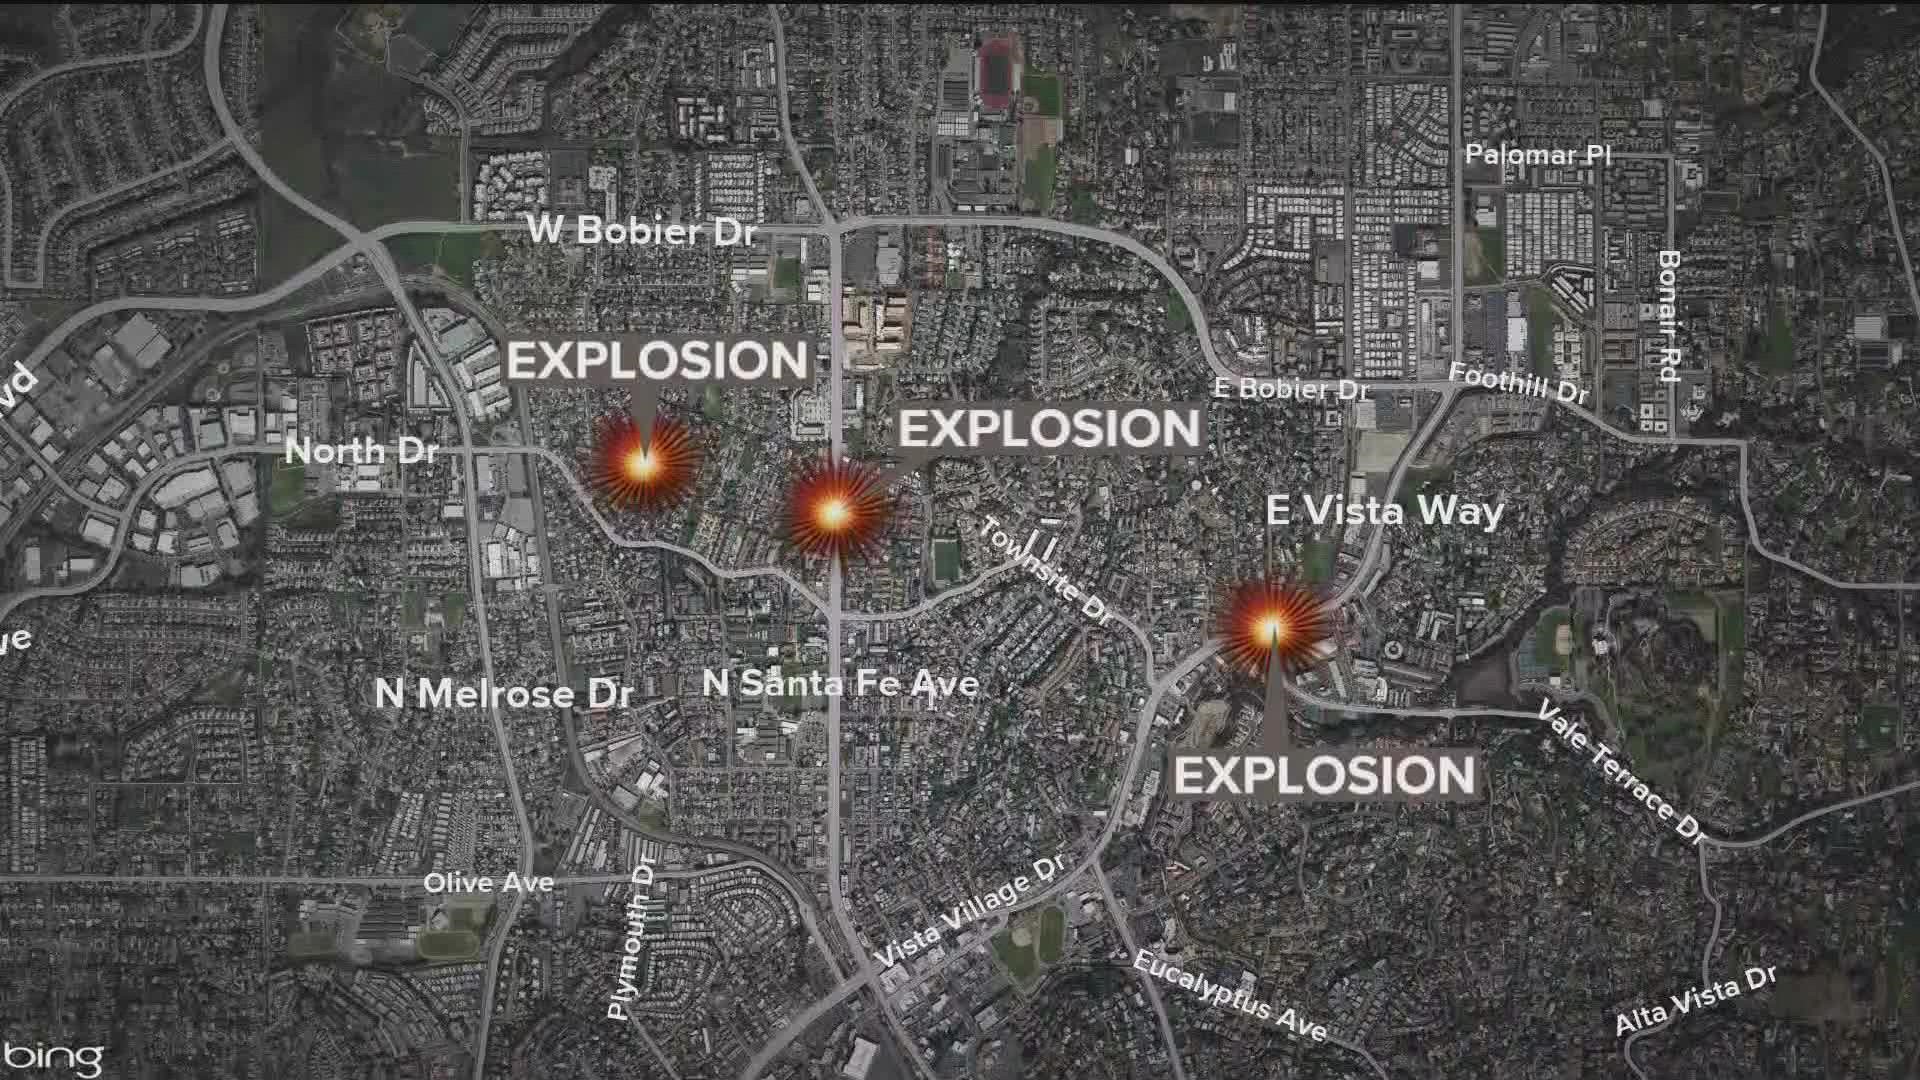 Two men and a woman were arrested Saturday in connection with Wednesday's string of explosions in Vista, authorities said.